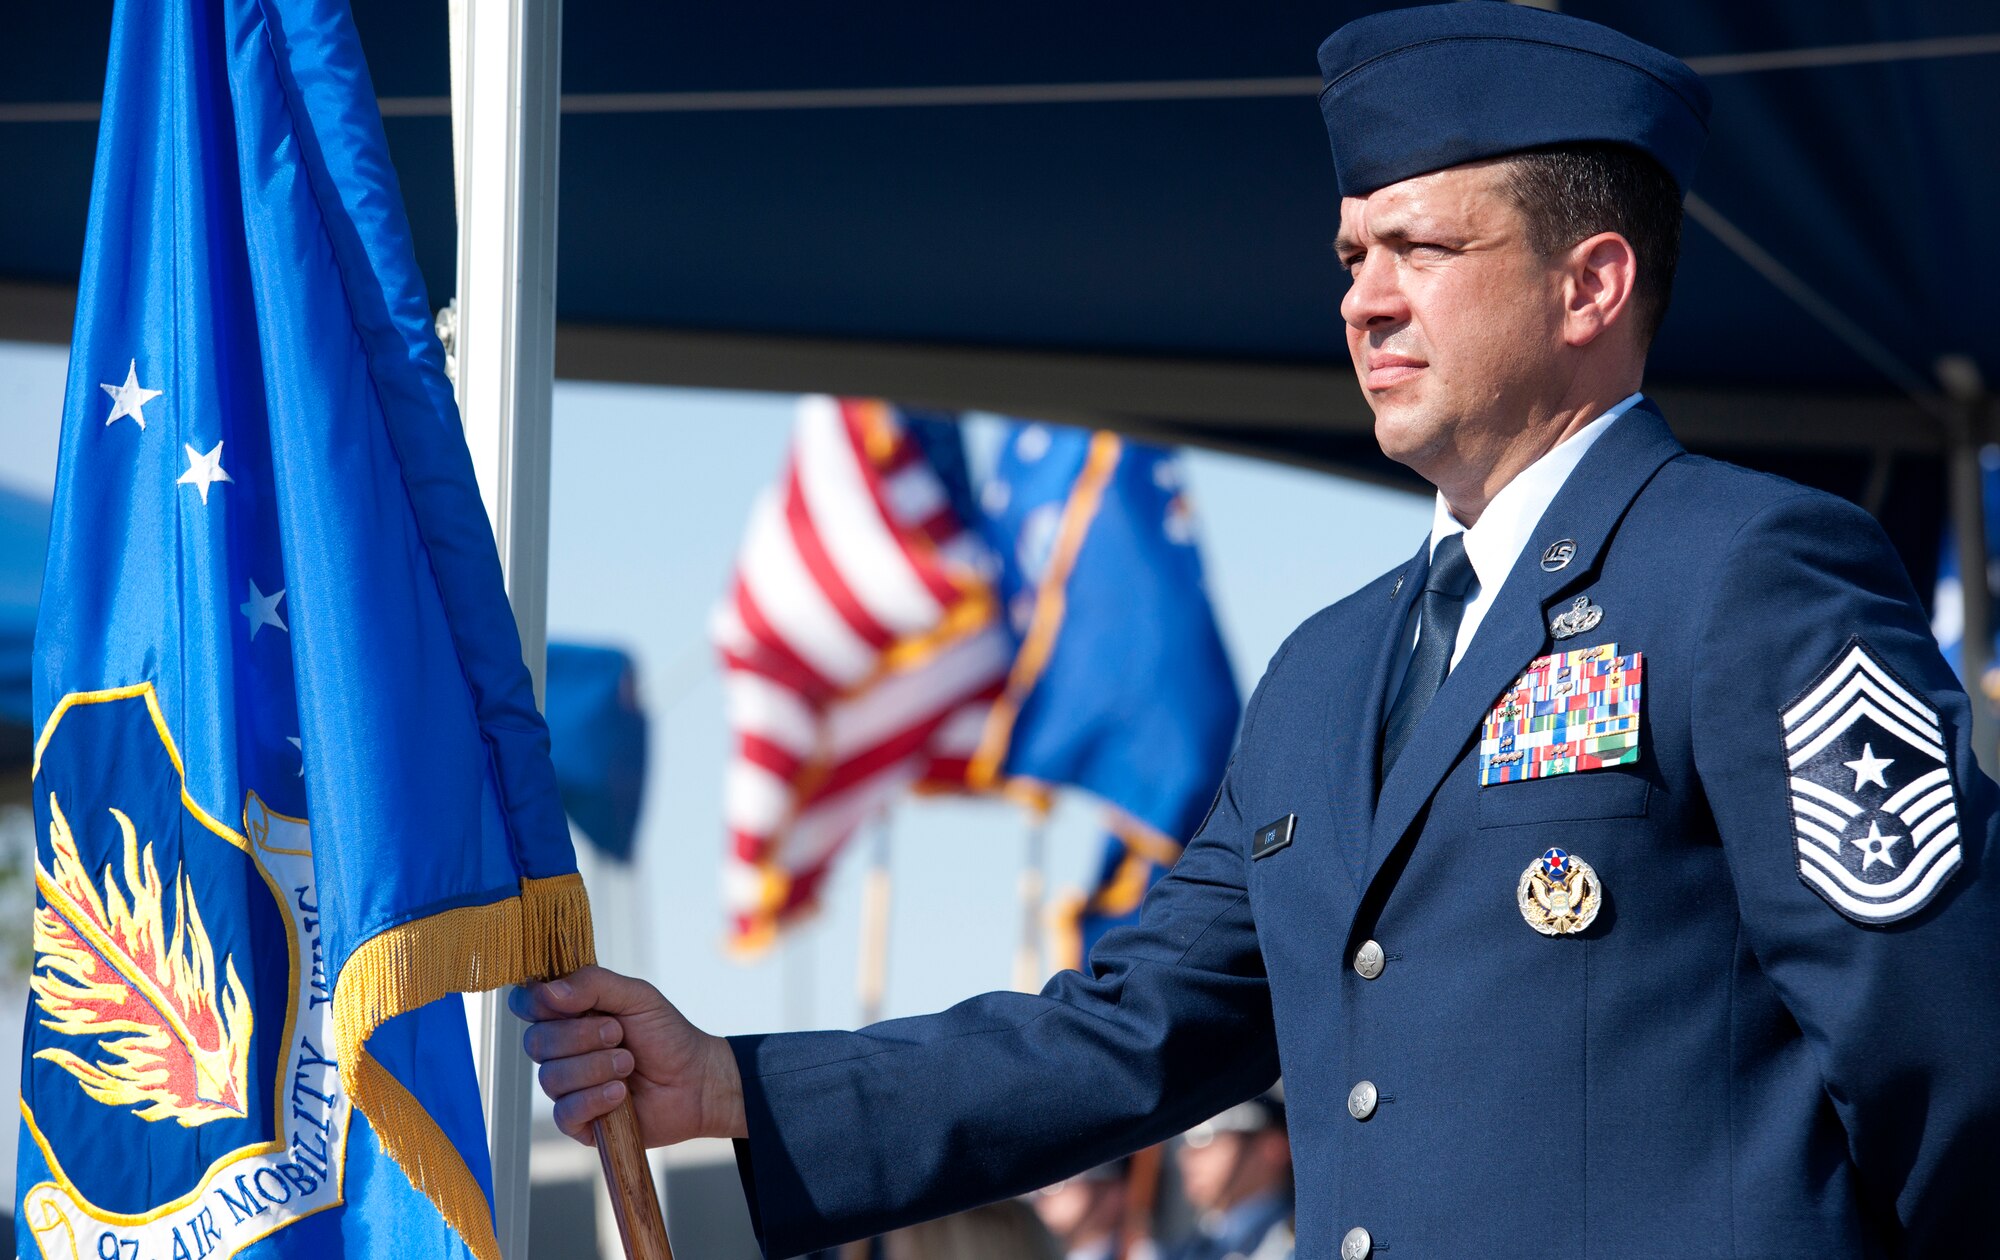 ALTUS AIR FORCE BASE, Okla. – Command Chief Master Sgt. David Fish, 97th Air Mobility Wing command chief, holds the wing guidon as part of the 97th AMW change of command ceremony, held at Wings of Freedom Park, June 27. The 97th AMW observed a change of command in which the flag of responsibility and leadership passed from Col. Anthony B. Krawietz, 97th AMW commander, to Col. William A. Spangenthal, incoming 97th AMW commander. (U.S. Air Force photo by Senior Airman Jesse Lopez / Released)